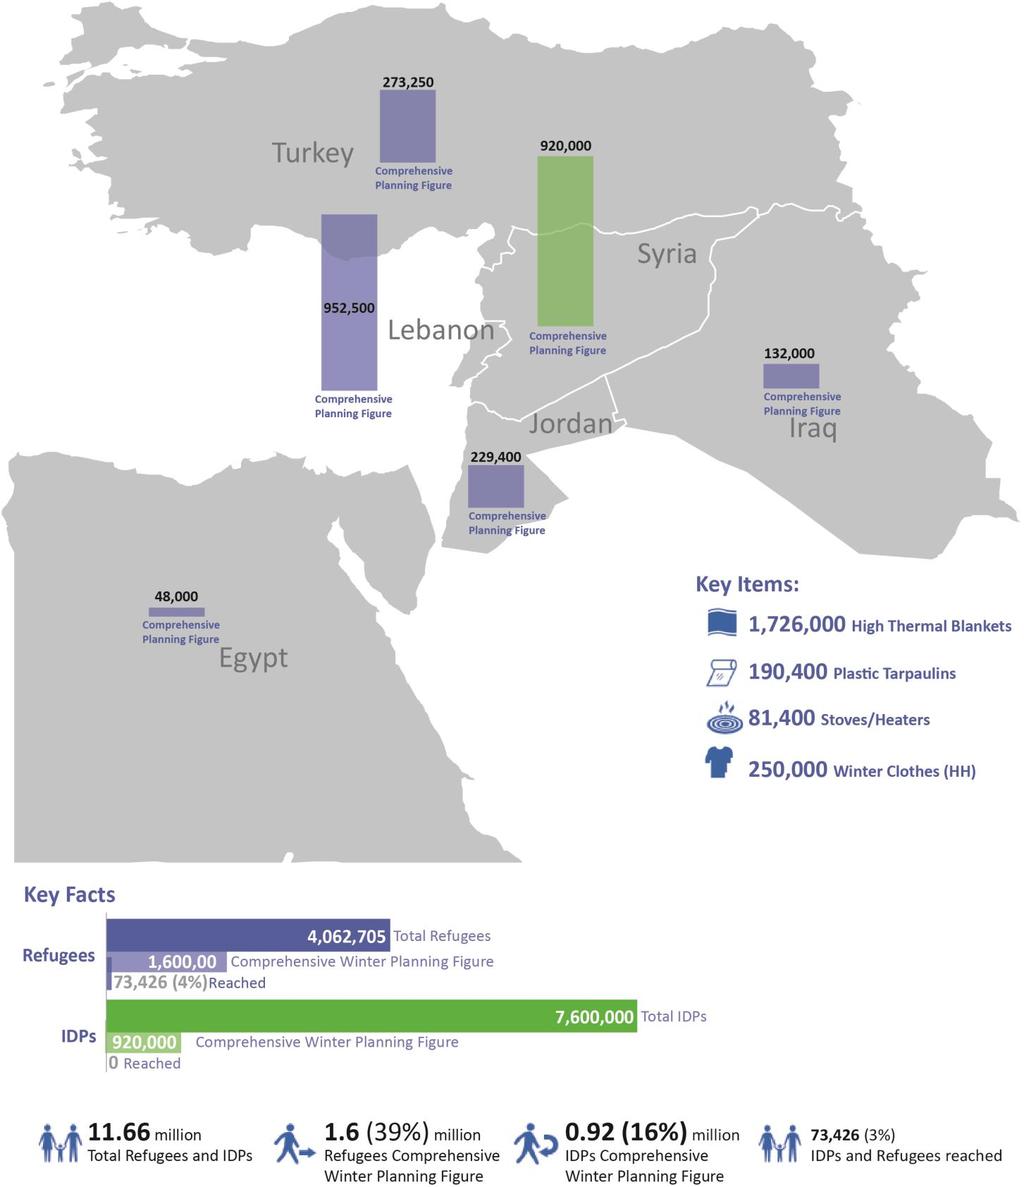 SYRIA SITUATION MAPPING THE REFUGEE AND IDP